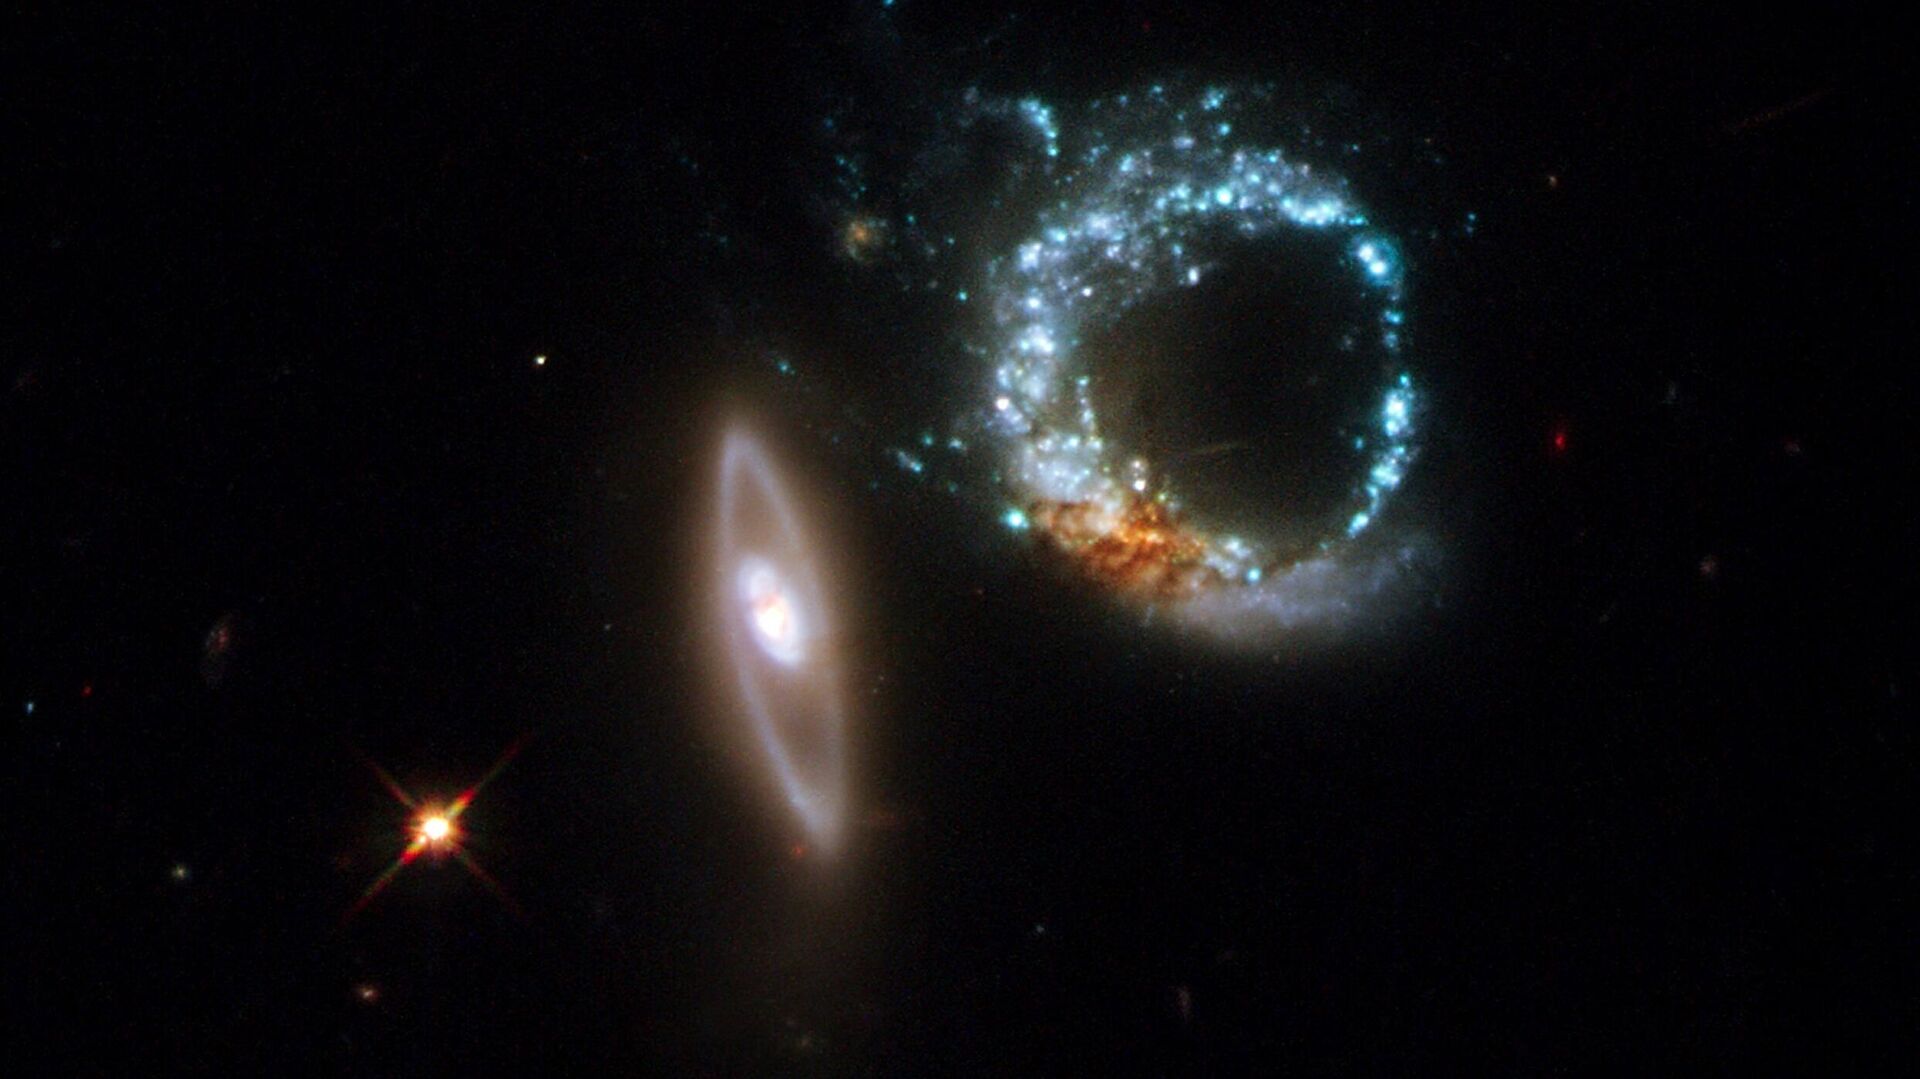 An image taken by Hubble Space telescope and released on October 30, 2008 by European Space Agency (ESA), shows a pair of gravitationally interacting galaxies called Arp 147, photographed on October 27-28, 2008. Arp 147 lies in the constellation of Cetus, more than 400 million light-years away from Earth. - Sputnik International, 1920, 09.04.2022